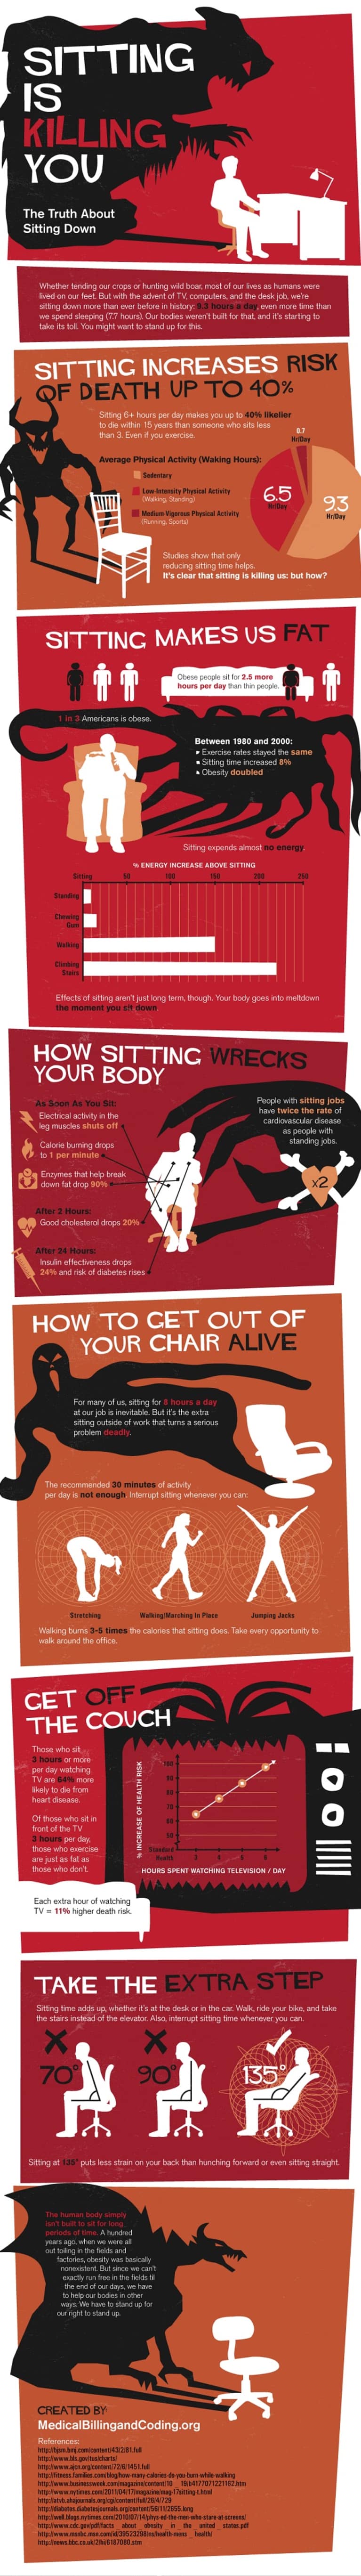 Sitting Is Killing You (Infographic)